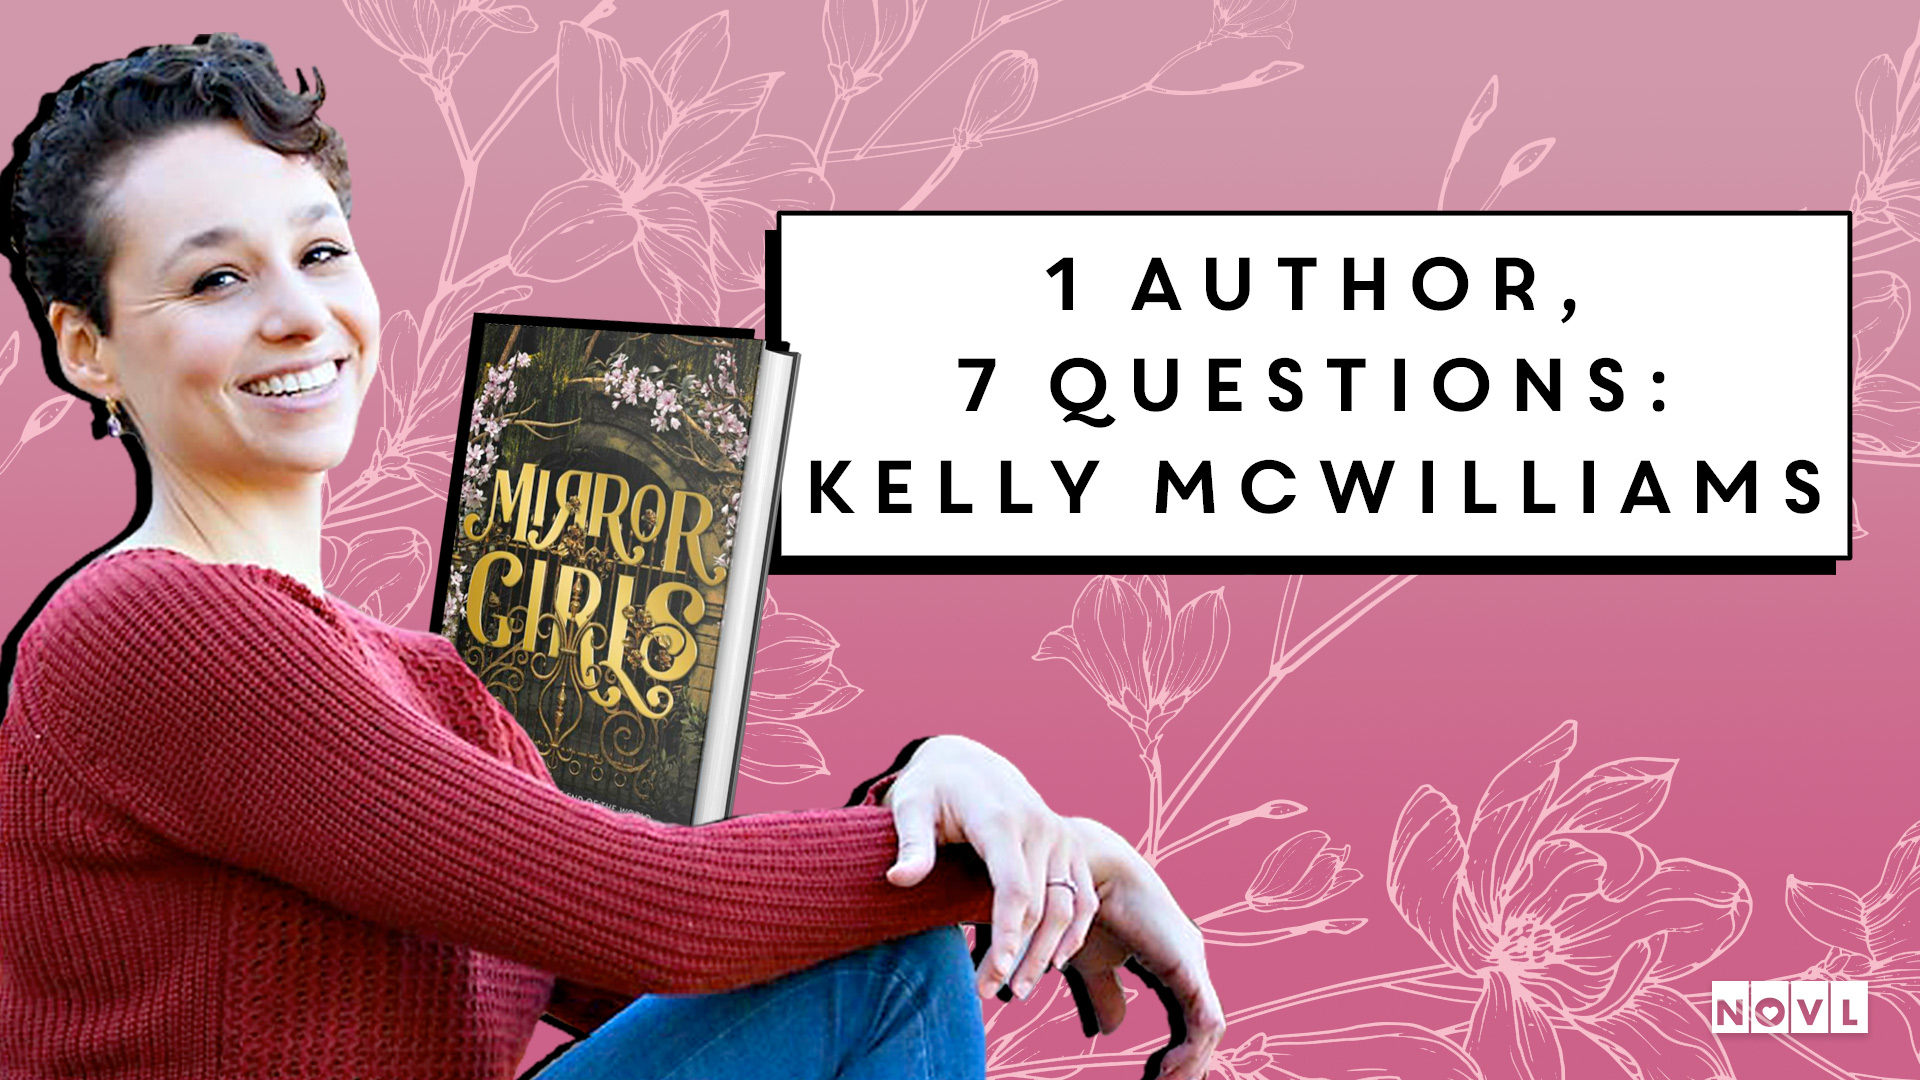 The NOVL Blog, Featured Image for Article: 1 Author, 7 Questions: Kelly McWilliams